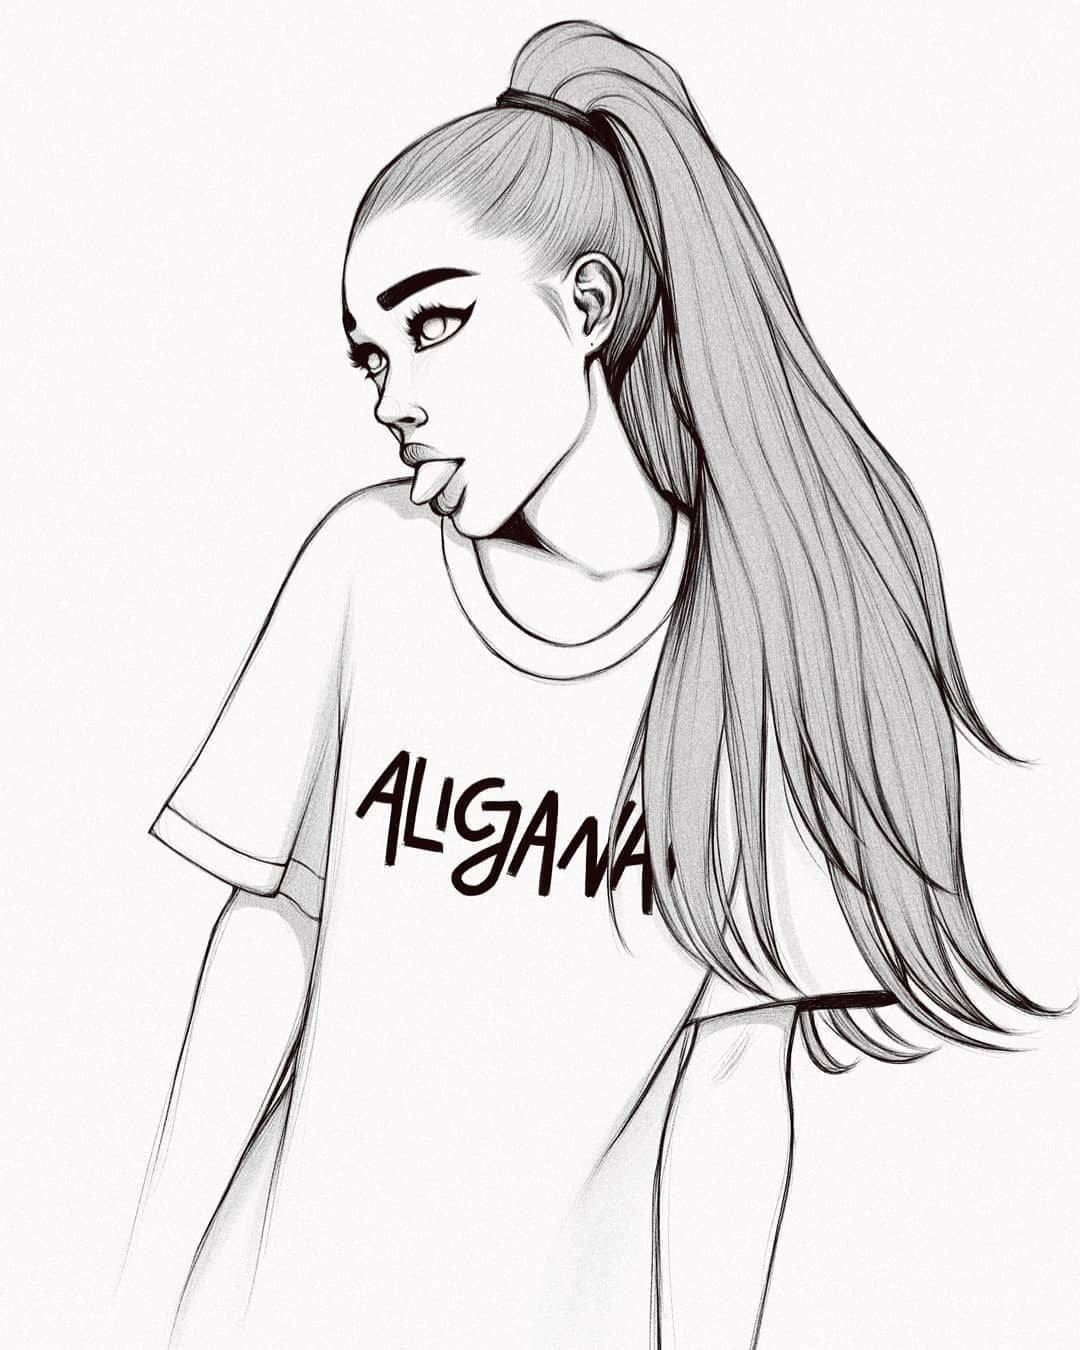 Ariana Grande Free coloring page - Download, Print or Color Online for Free